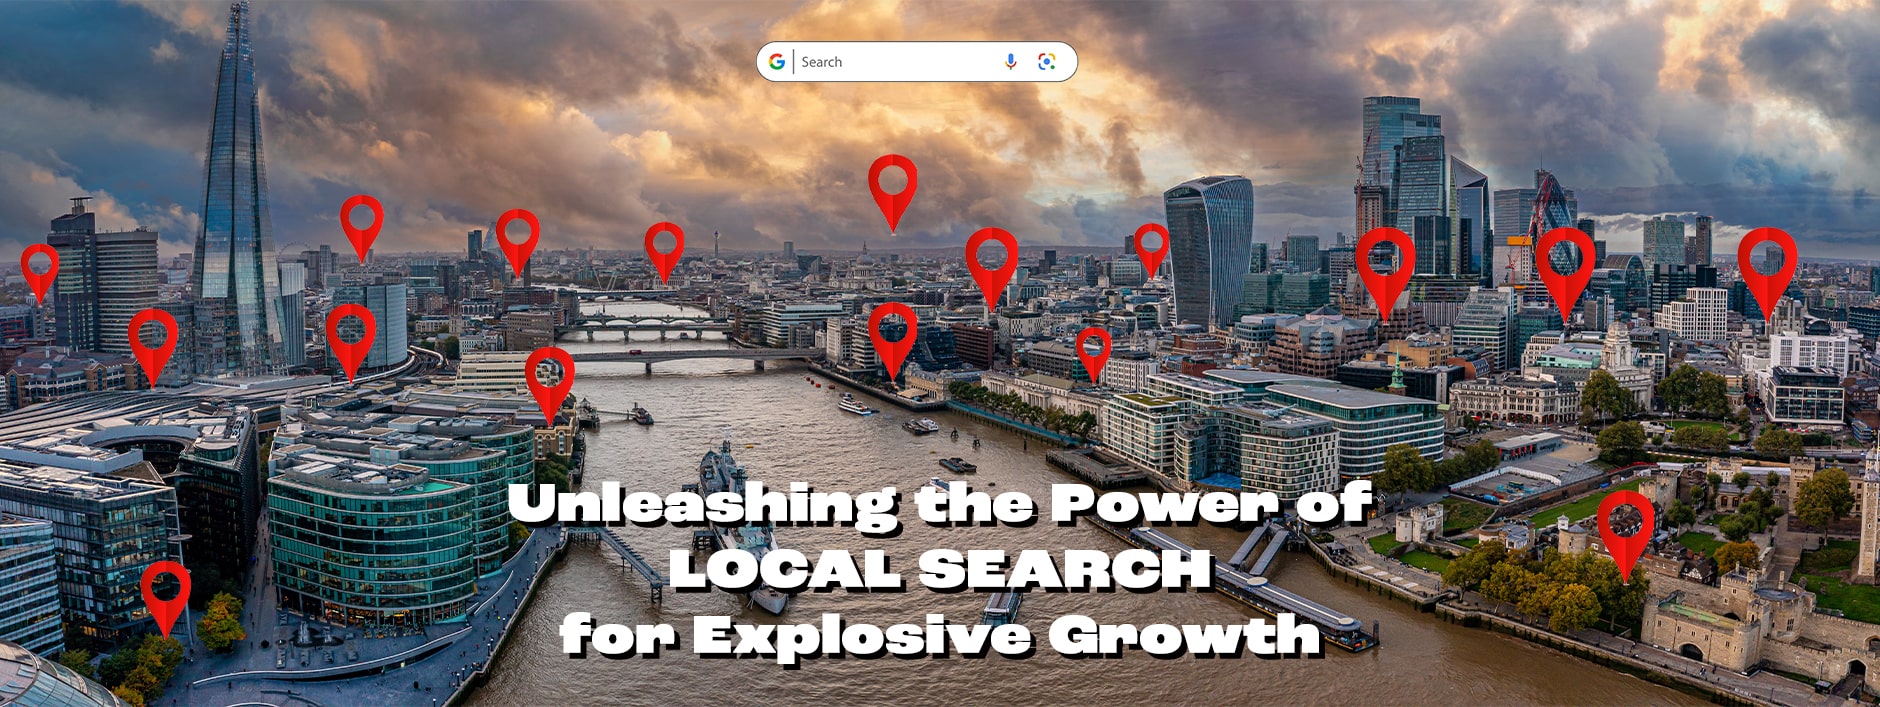 Header image for a blog post on how to unleash the power of local search for explosive growth